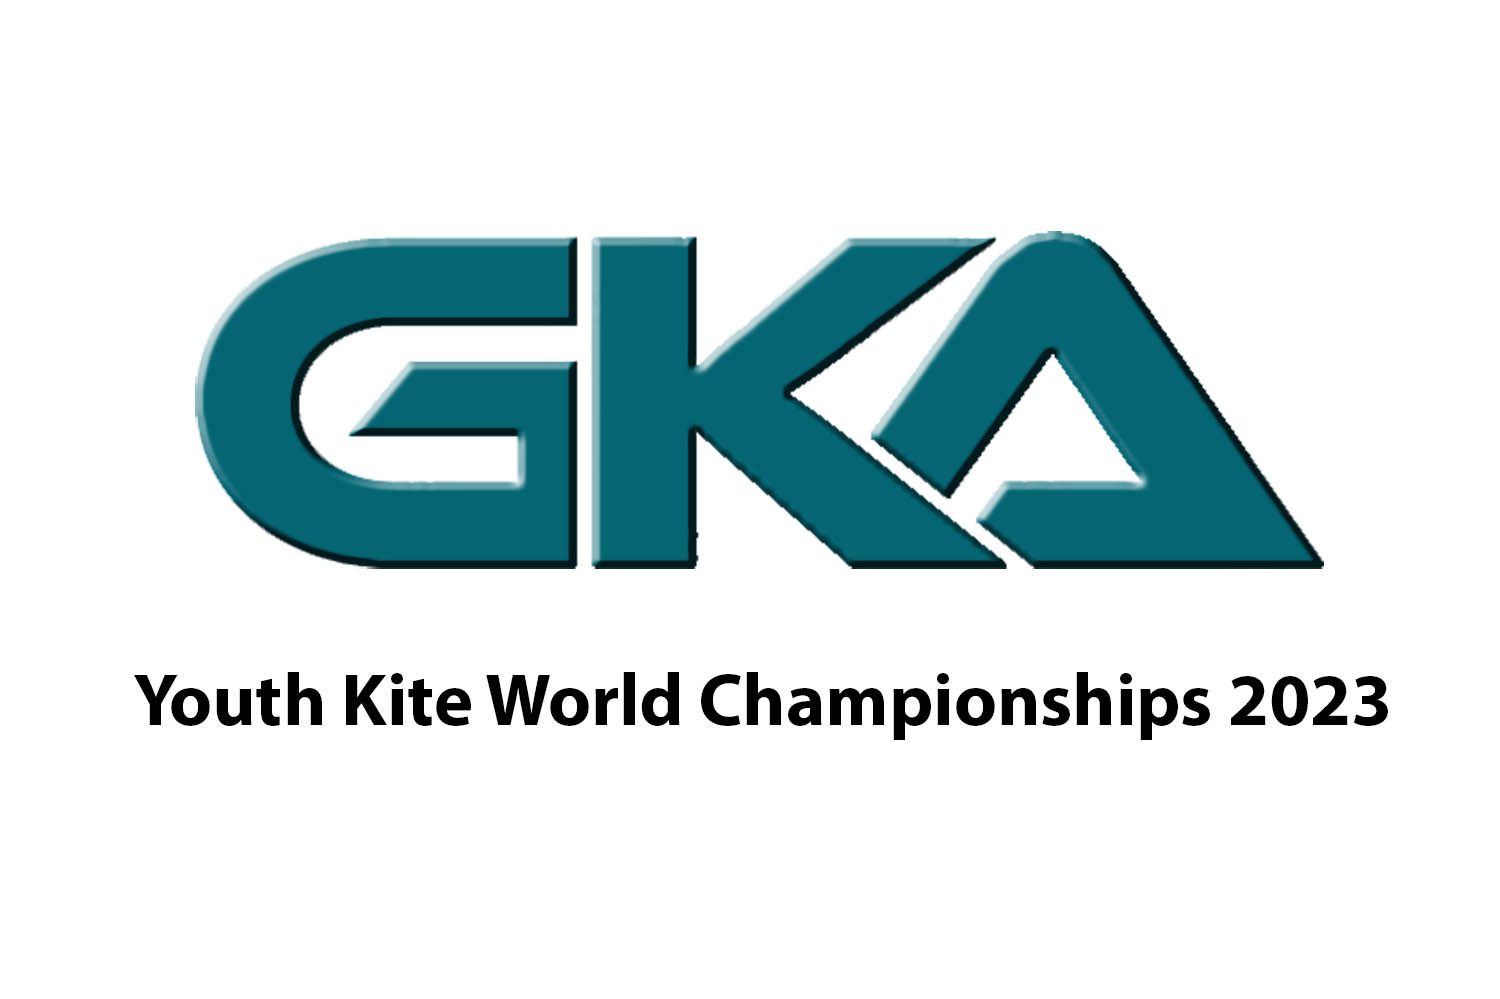 The GKA Youth Kite World Championships 2023: A Showcase of Young Talent